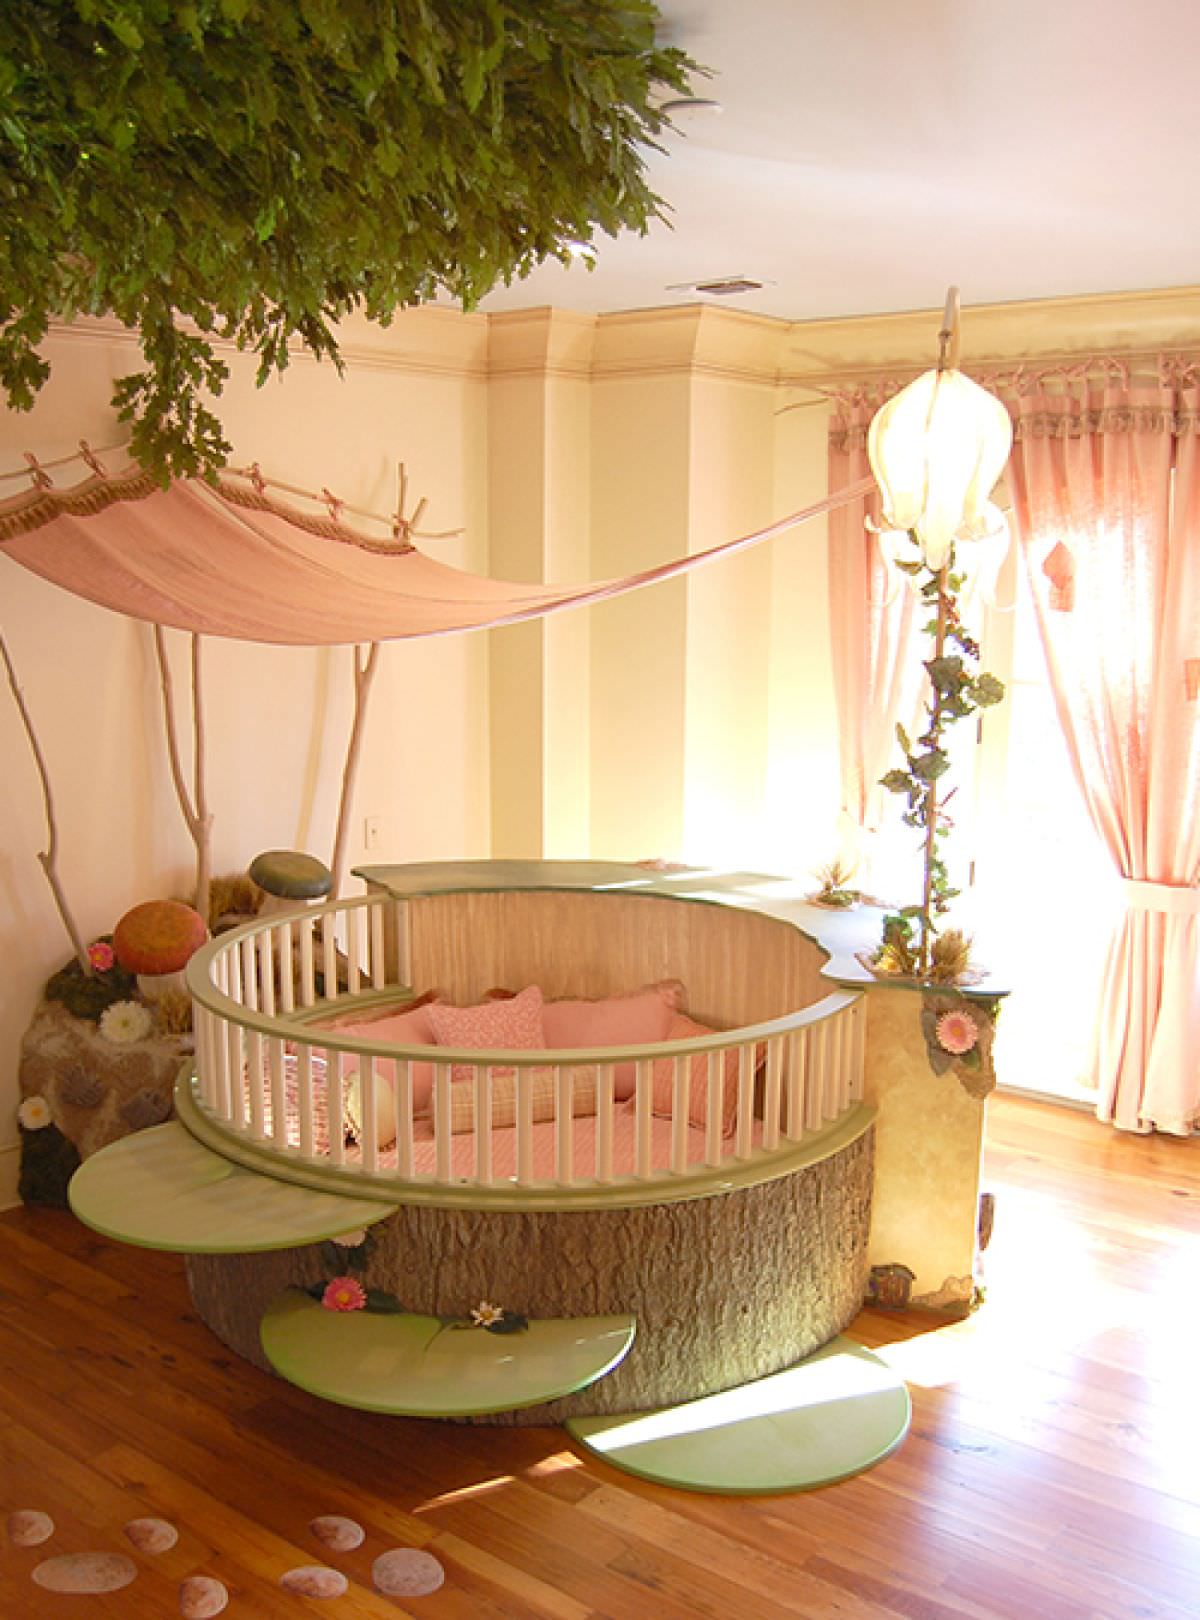 disney bedroom themed excellent amazing rooms baby bed nursery princess fairy babies children toddler kid idea them adult boy homes